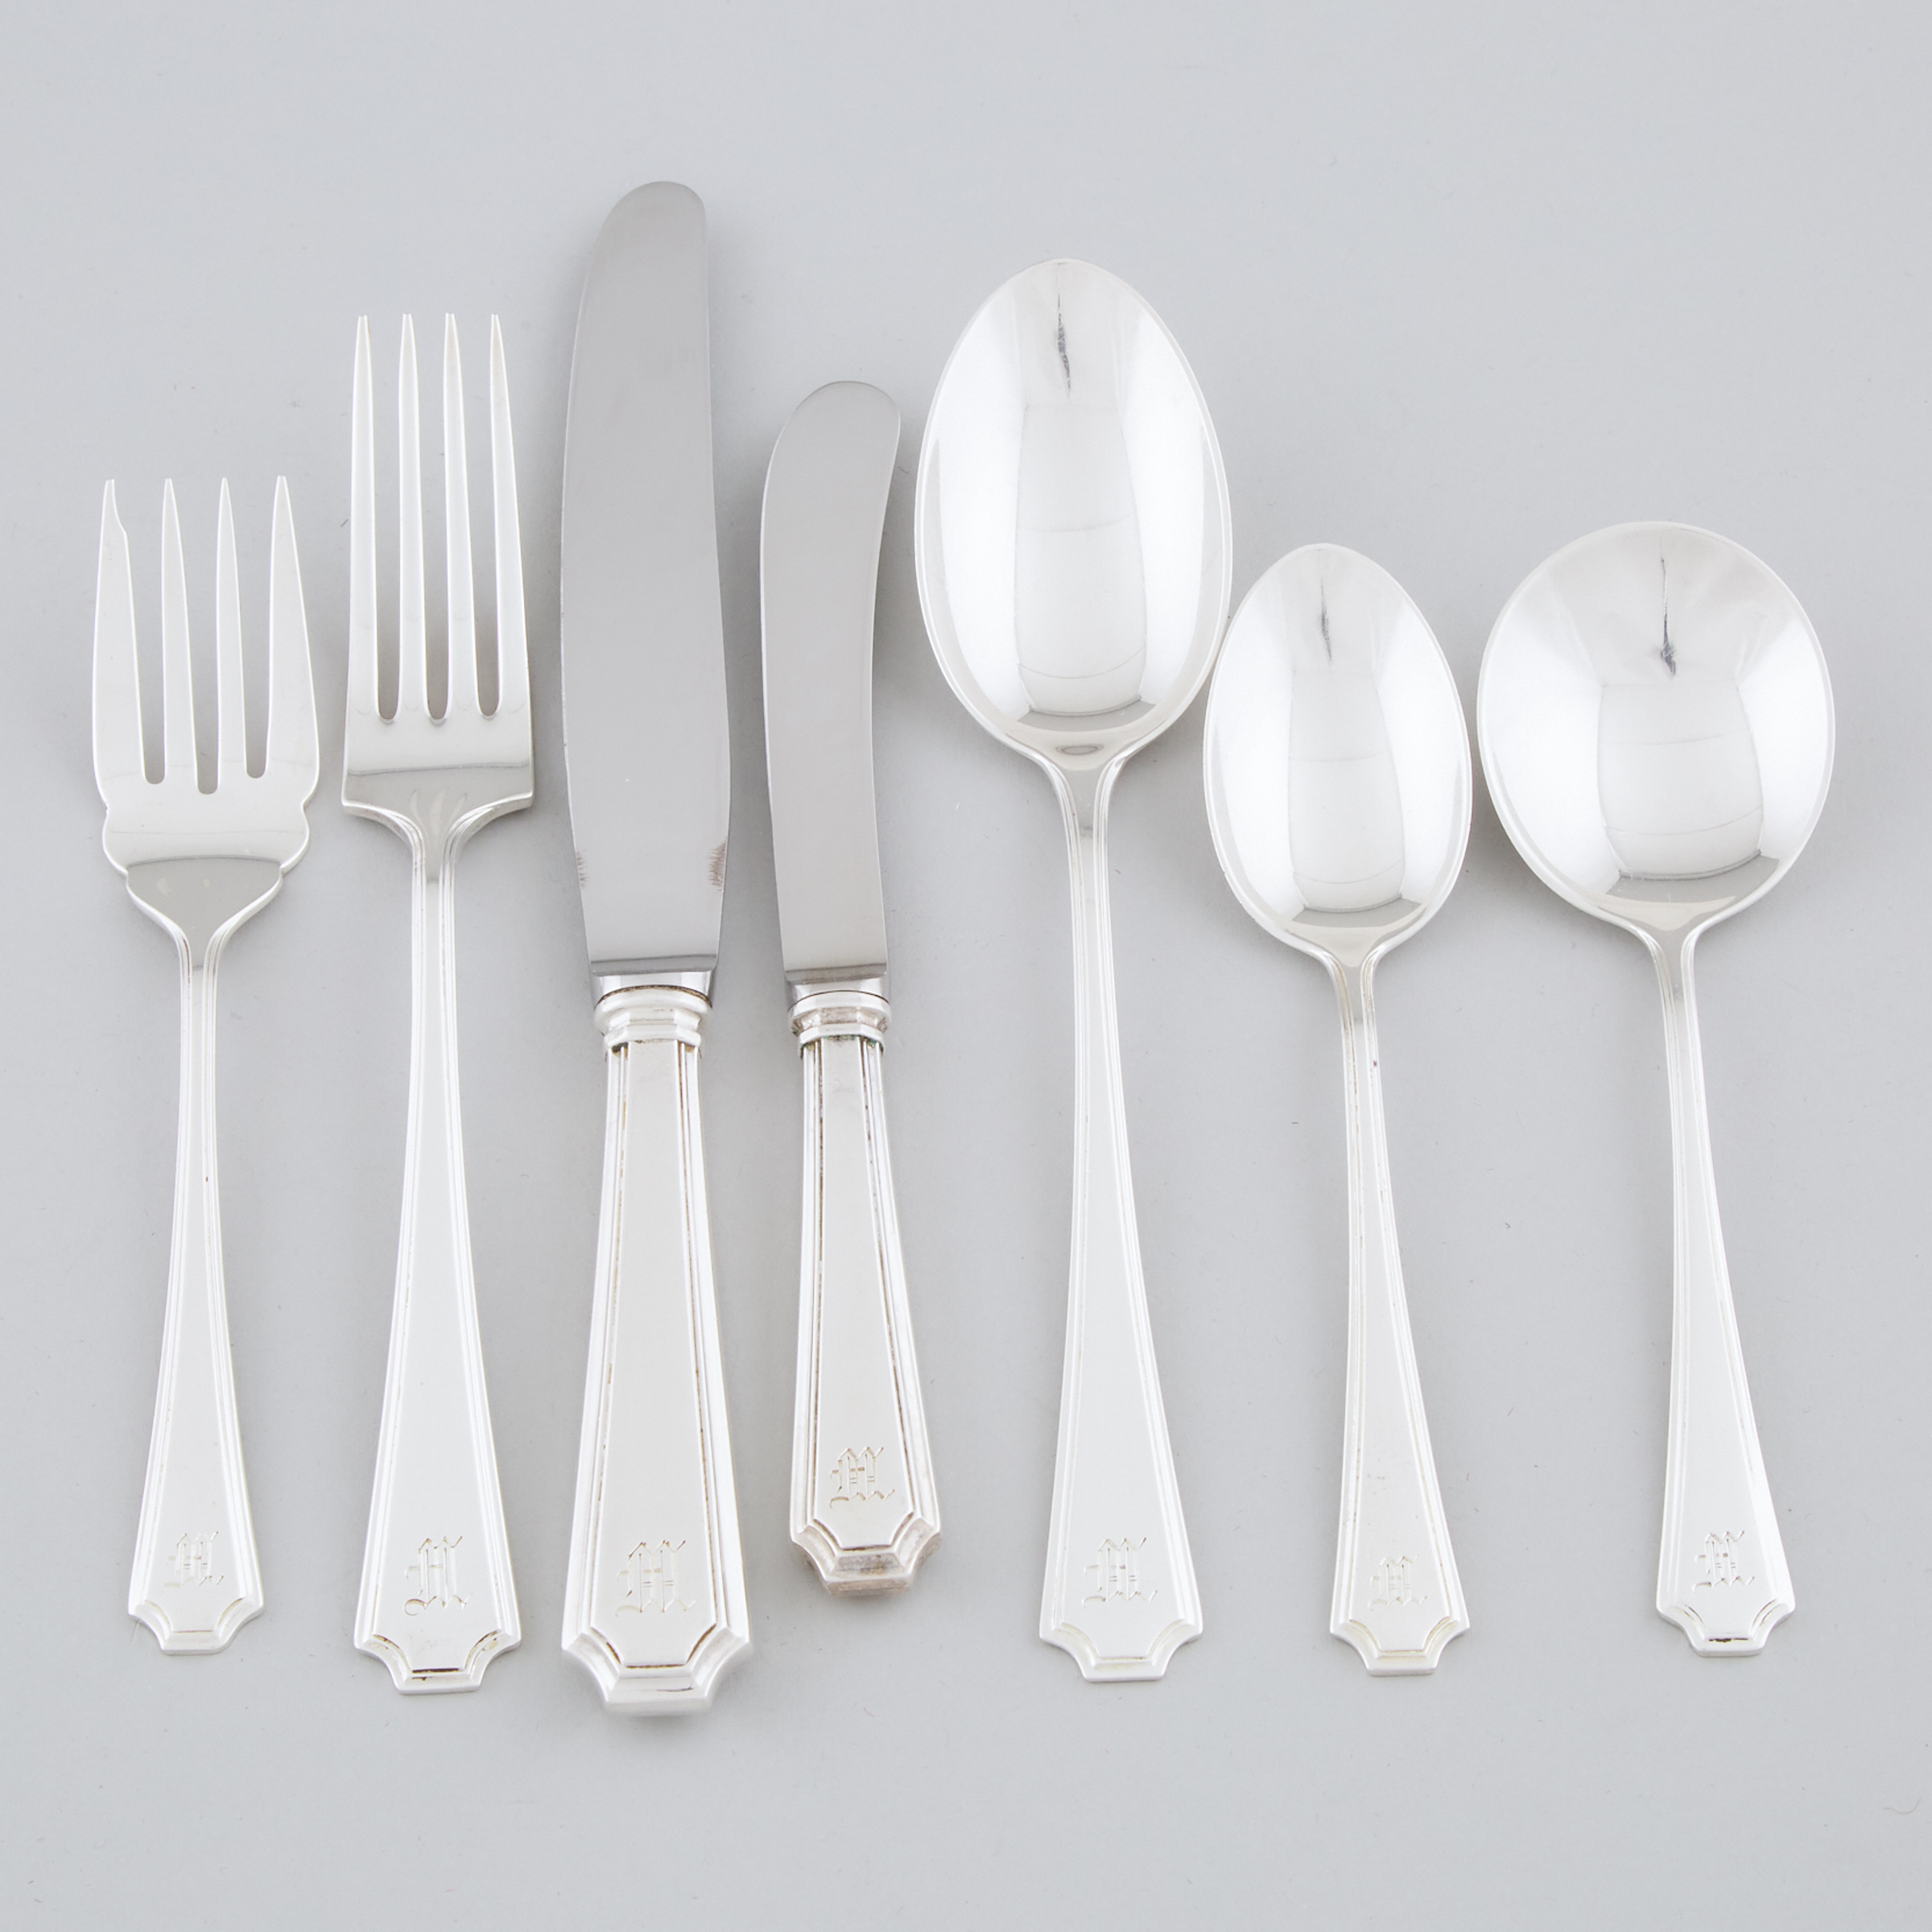 Canadian Silver ‘Devonshire’ Pattern Flatware, Henry Birks & Sons, Montreal, Que., 20th century